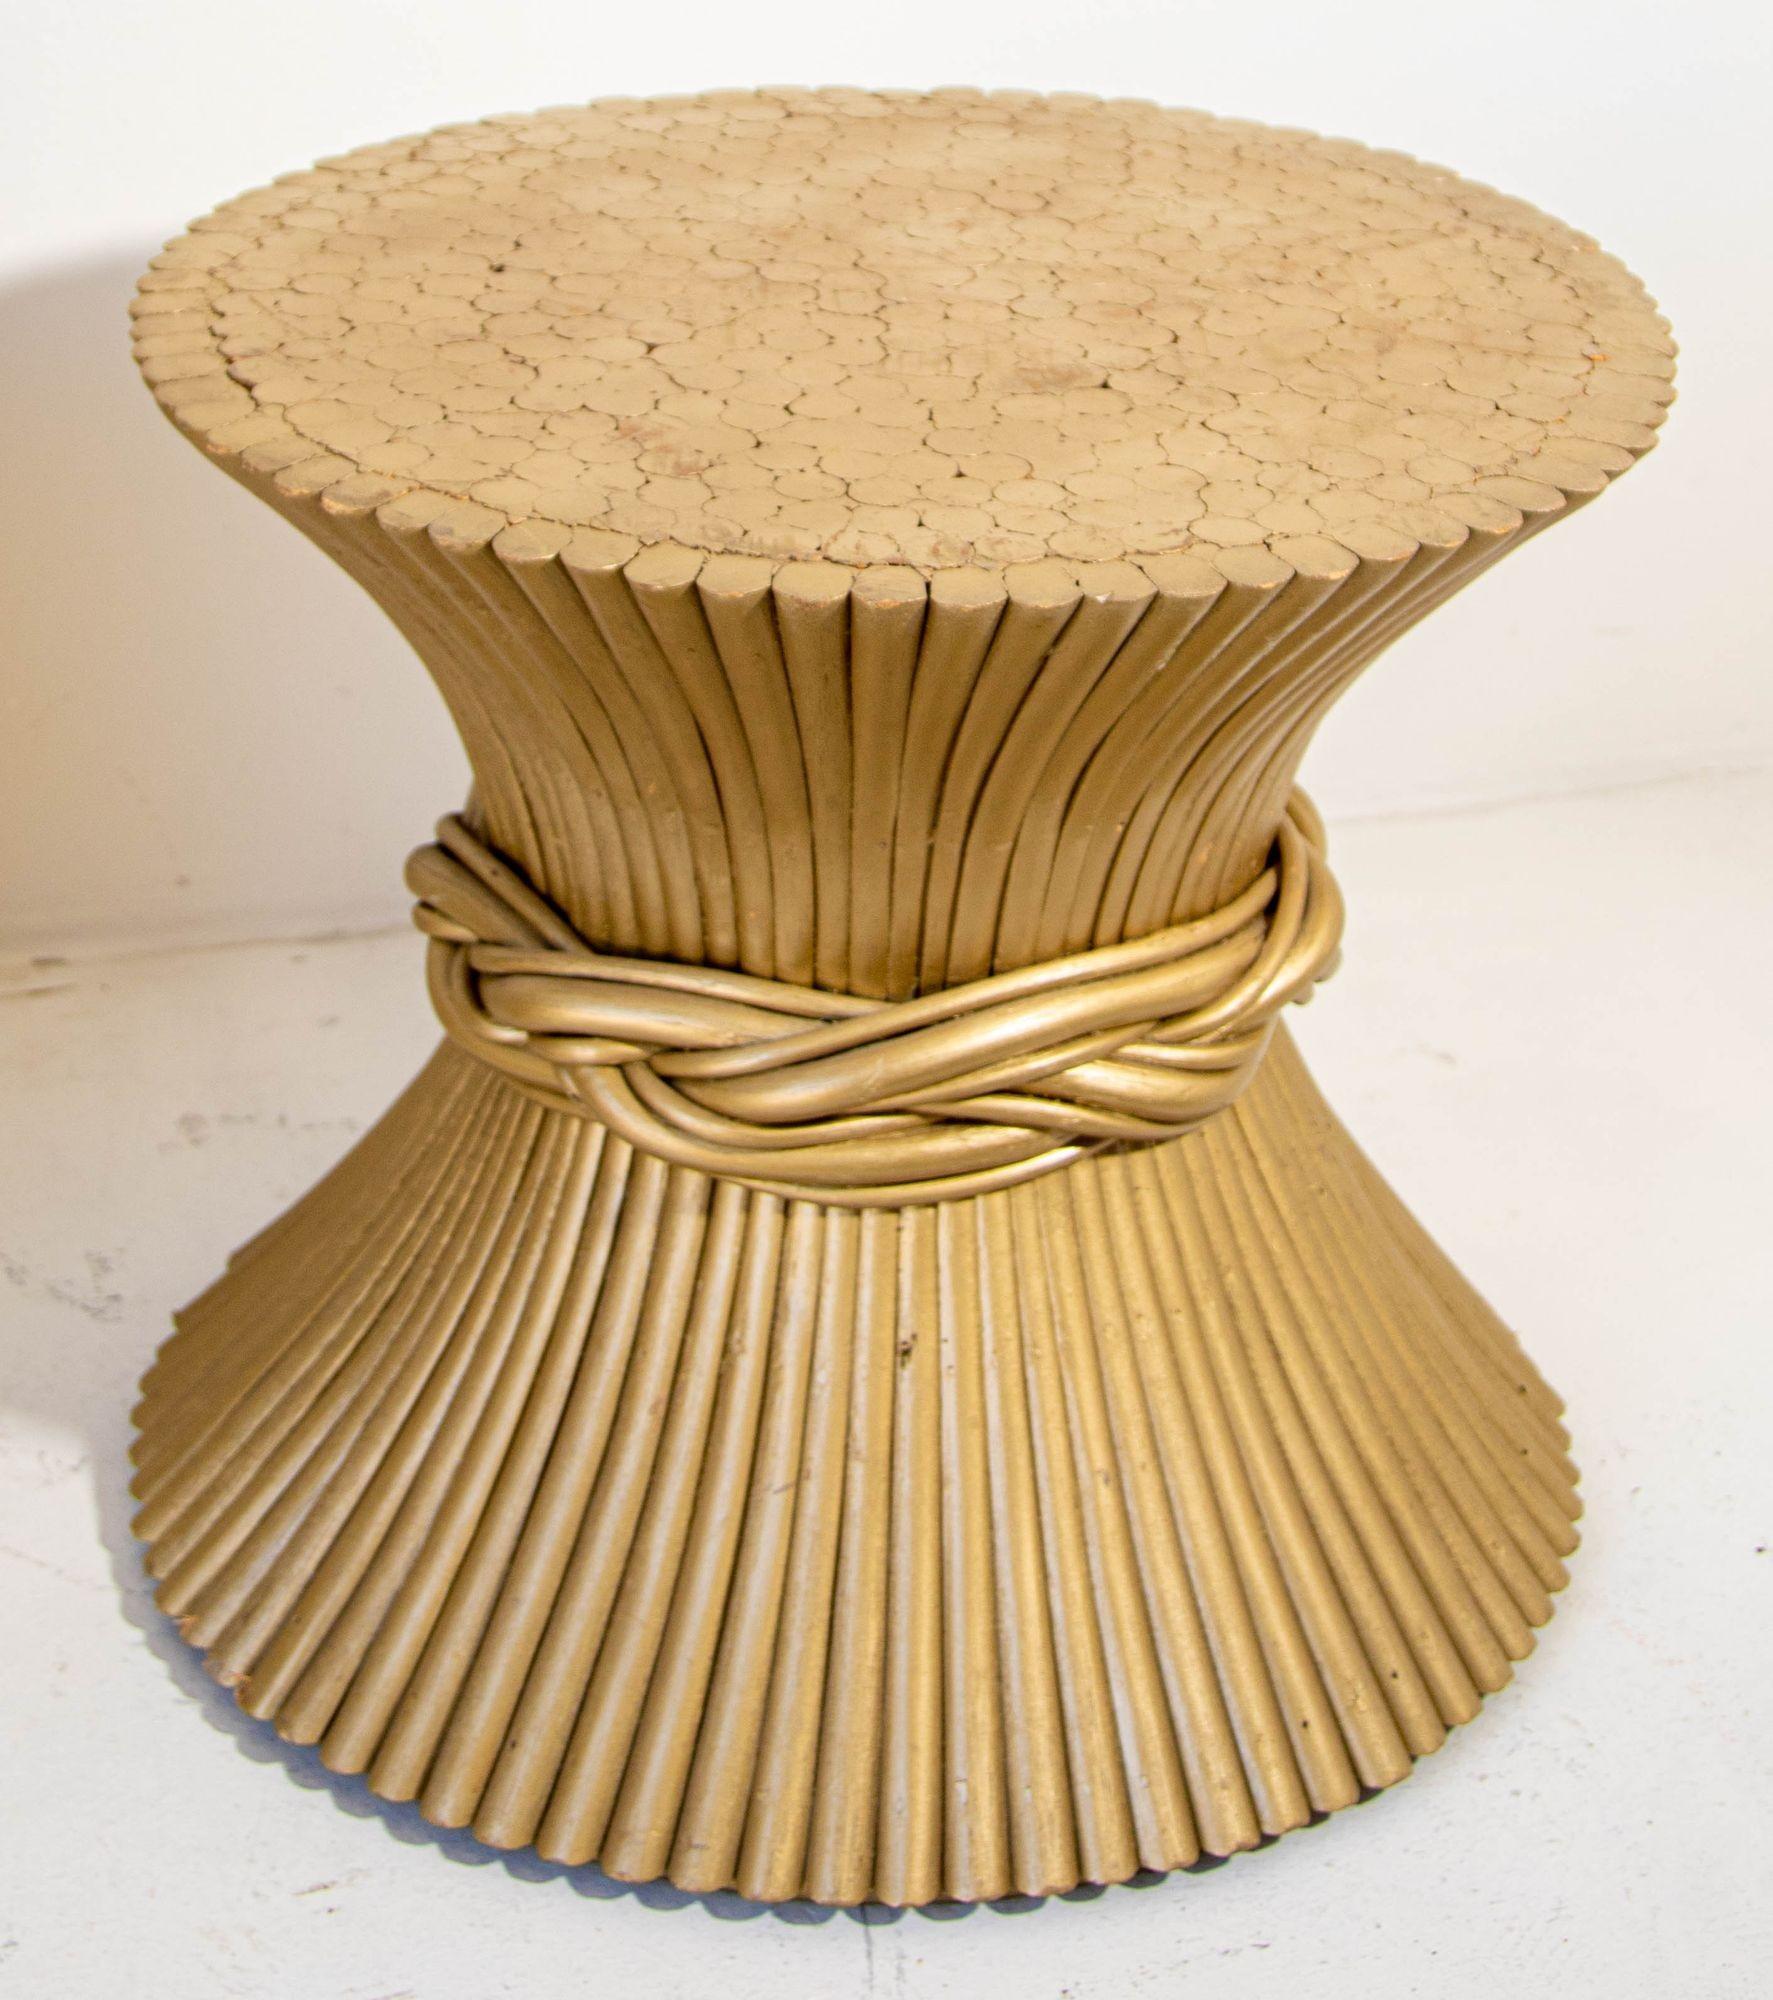 Large 1970s John Mcguire style sheaf of wheat bamboo round side or end, coffee tables.
Pair of large coffee table gilt painted sheaf of bamboo wheat side, end, occasional tables round pedestals attributed to McGuire.
Add a large piece of glass to